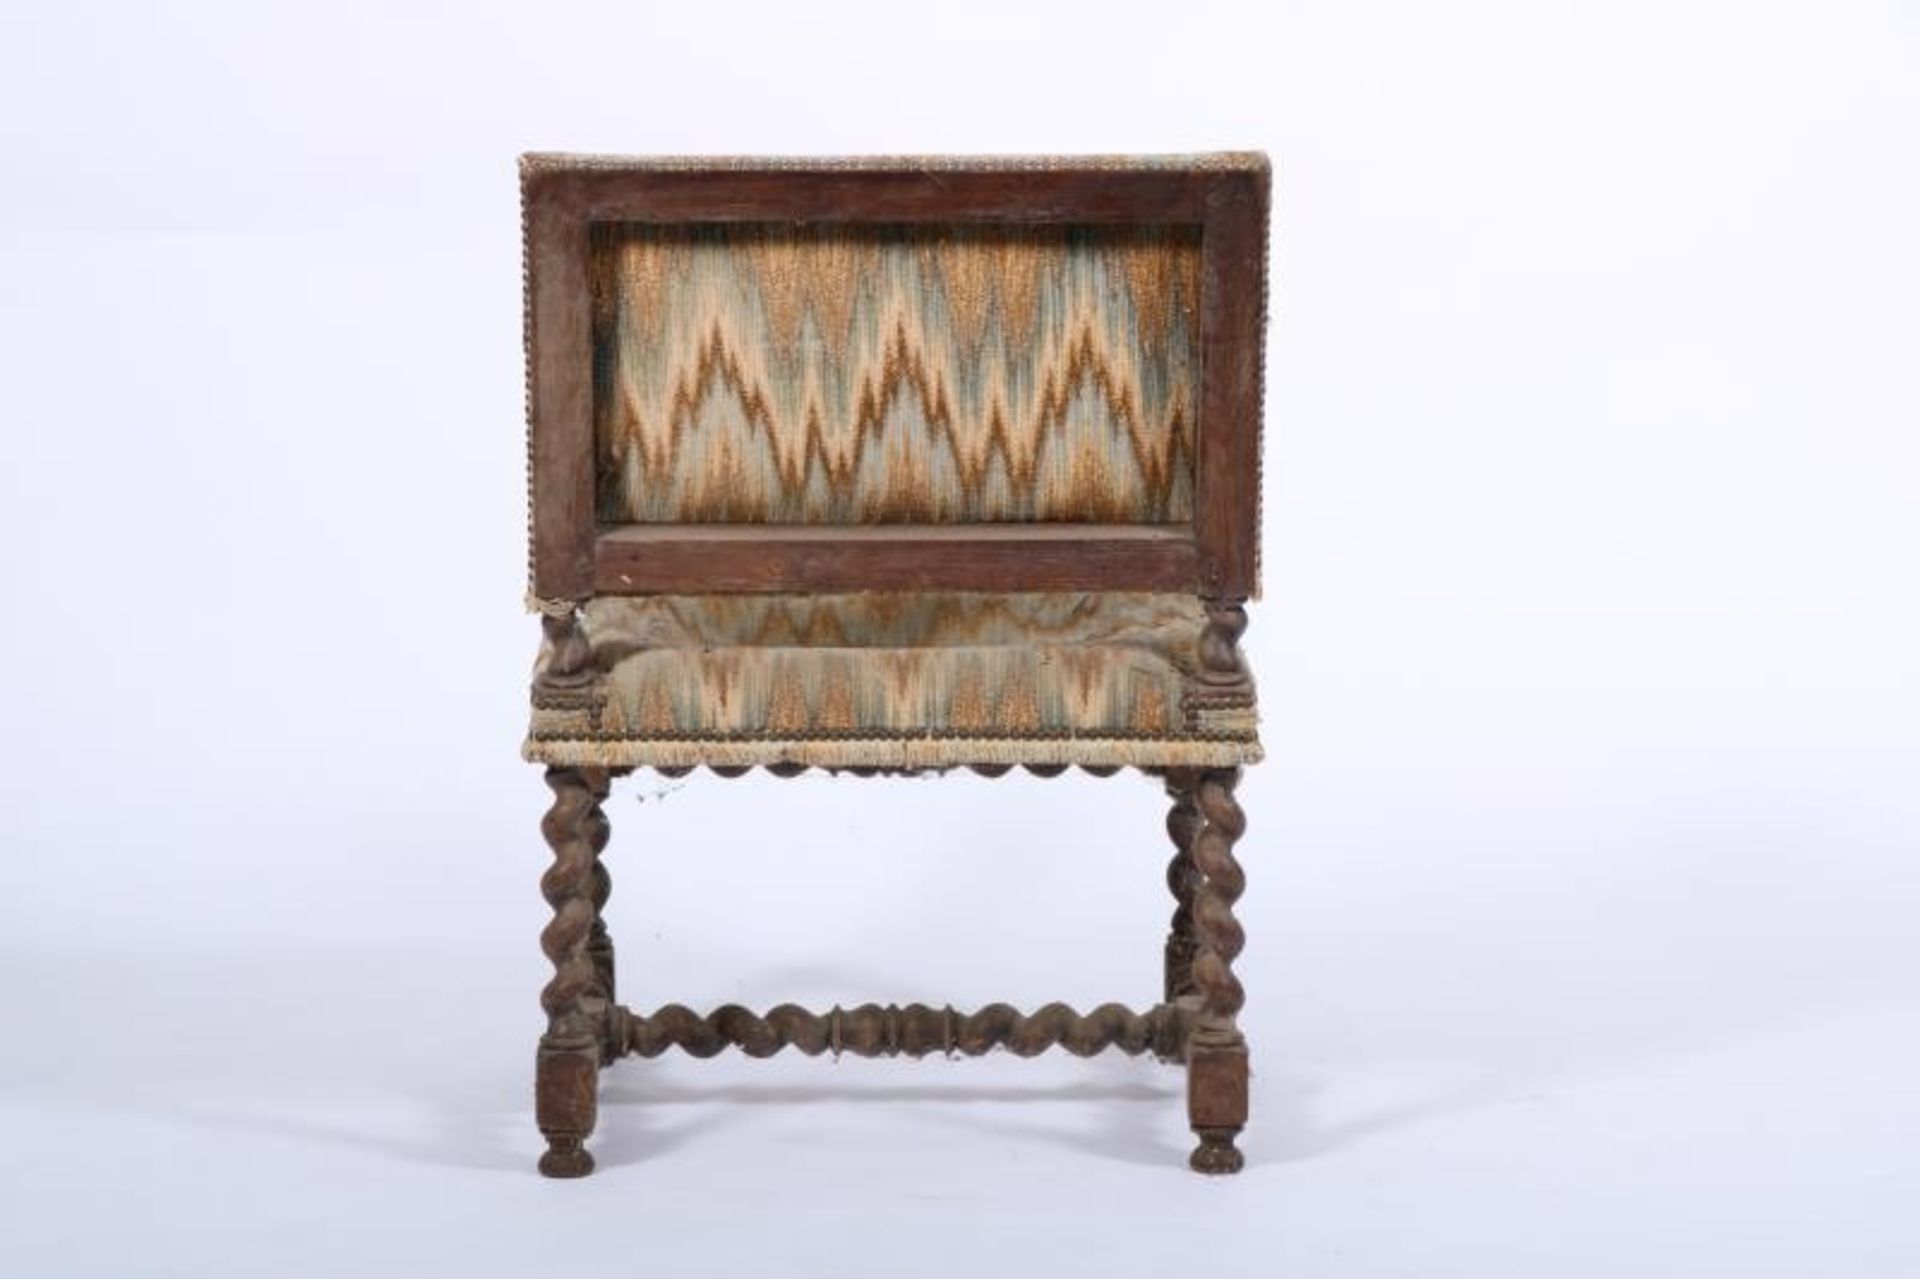 A nutwood armchair in 17th century style, The Netherlands, ca. 1900. - Image 3 of 3